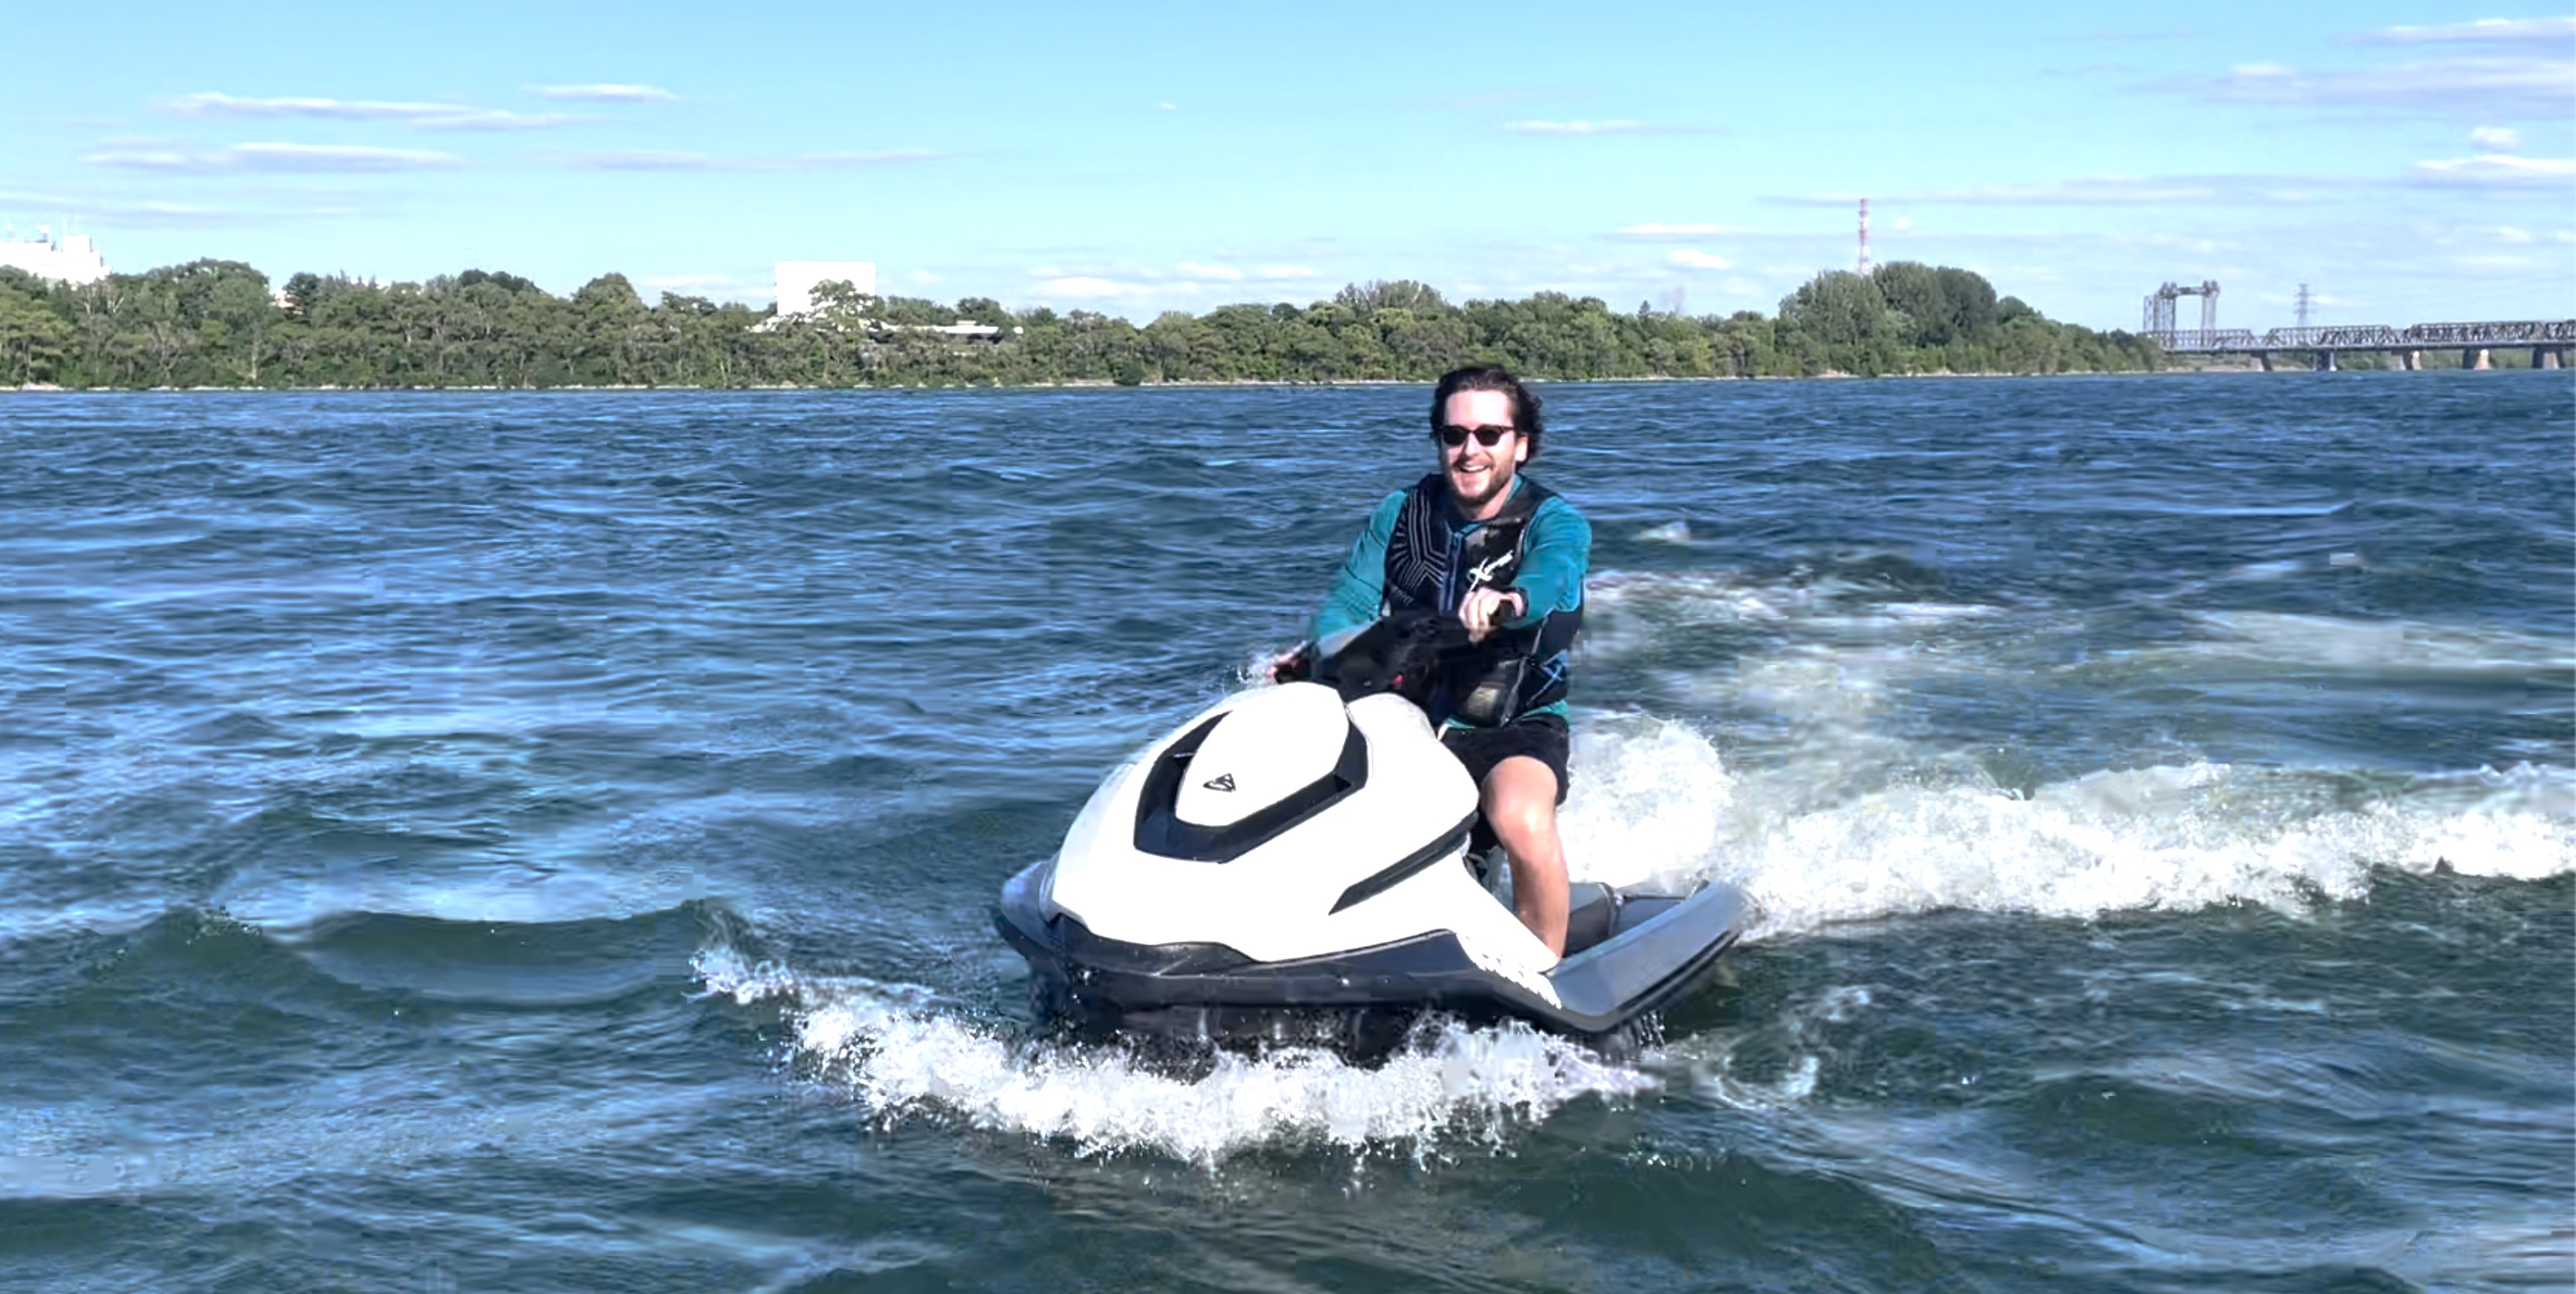 Taiga Orca electric jet ski is here, and it's pure unadulterated